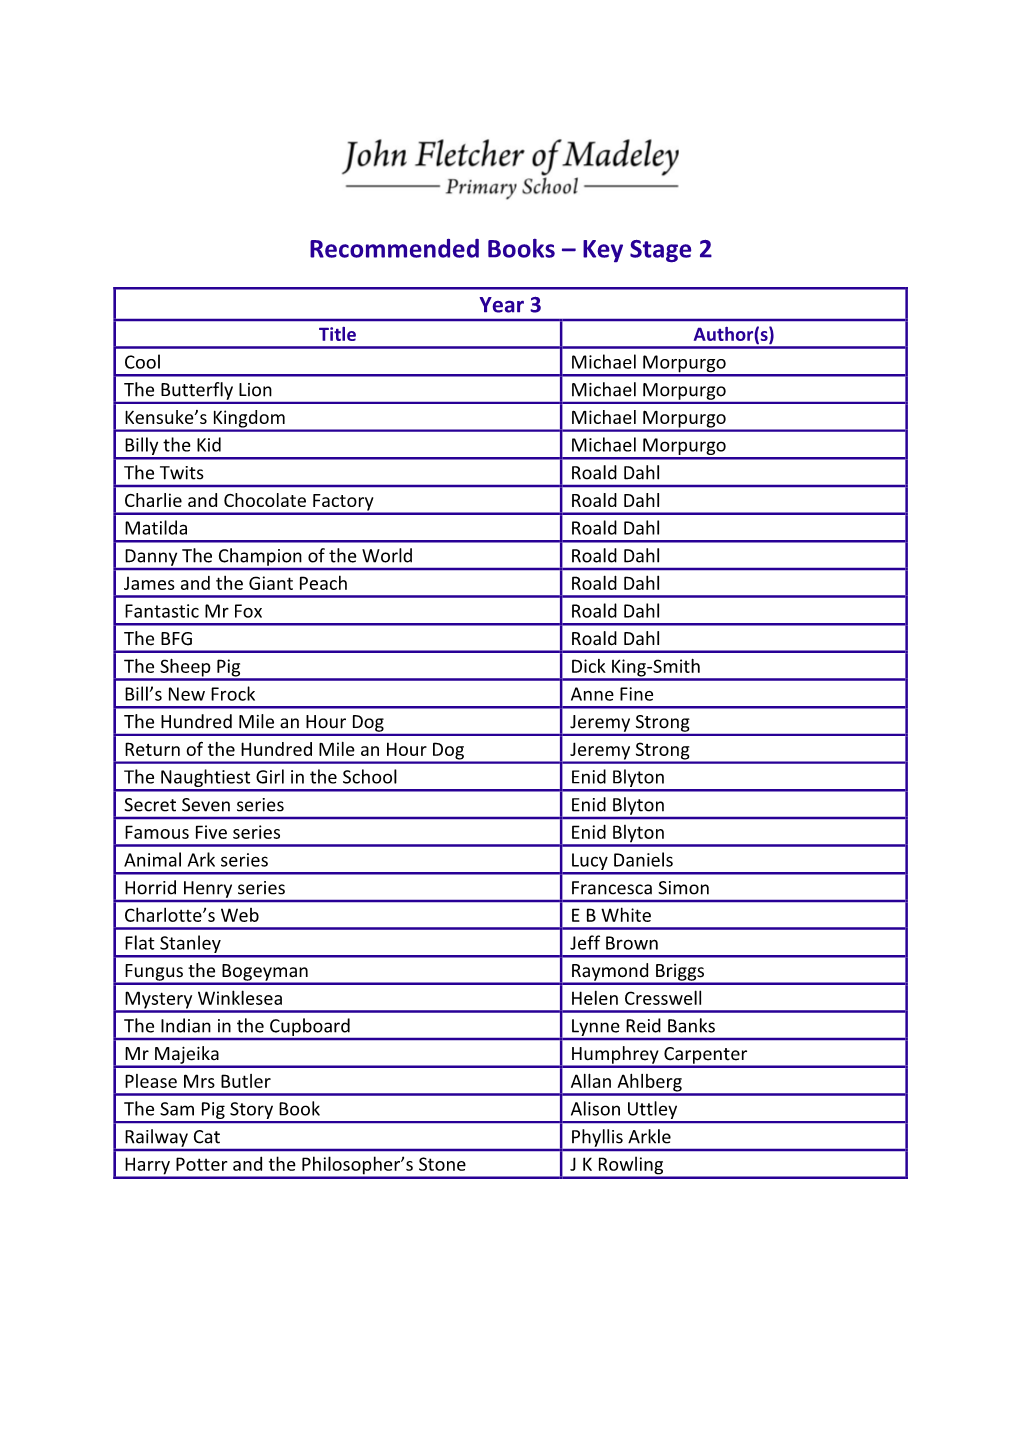 Recommended Books – Key Stage 2